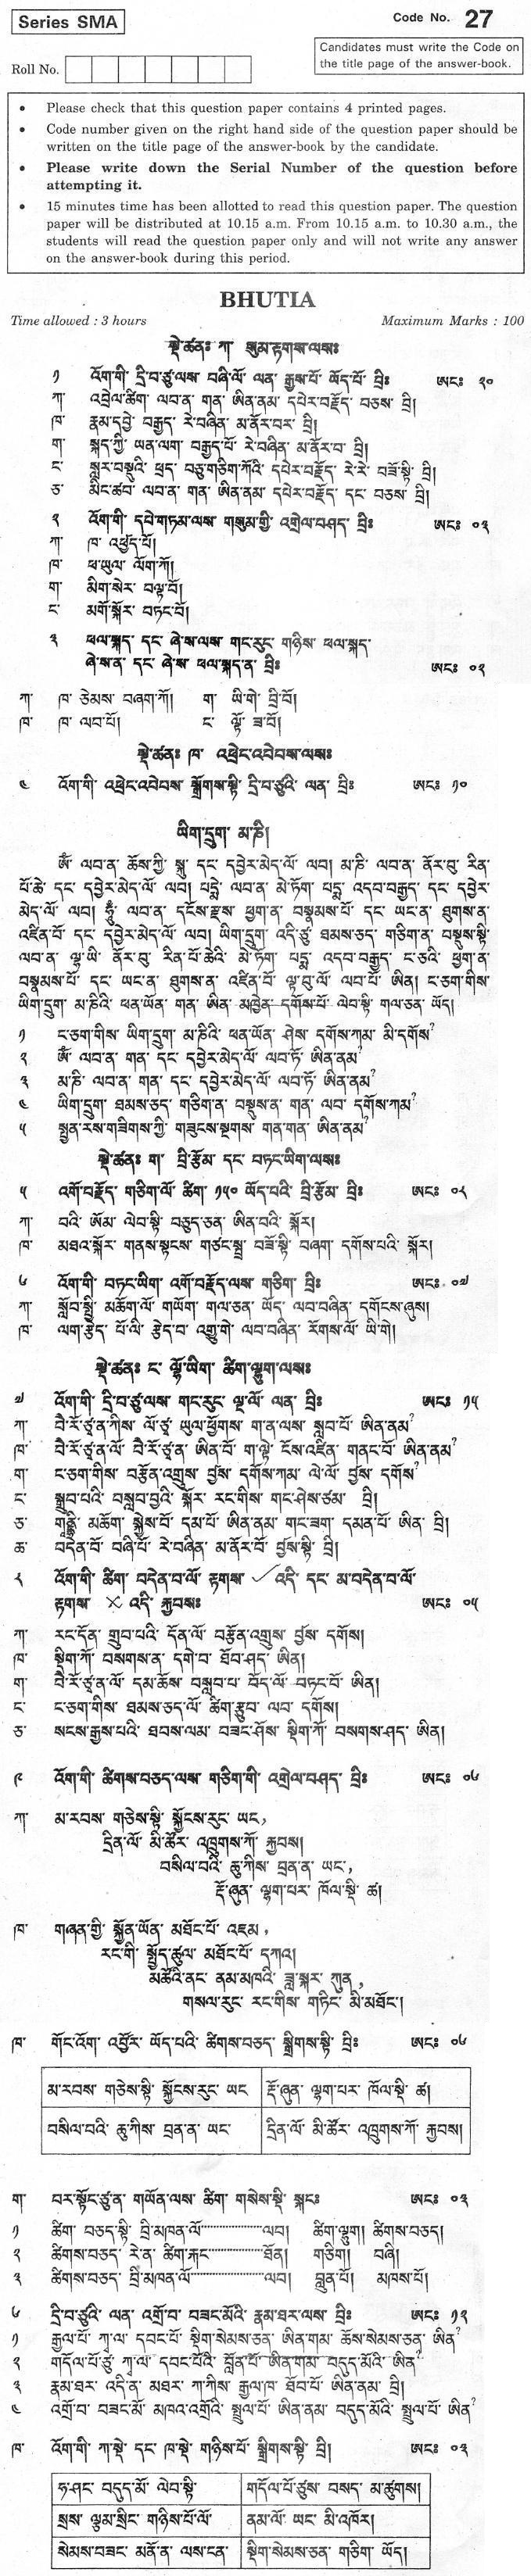 CBSE Class XII Previous Year Question Paper 2012 Bhutia